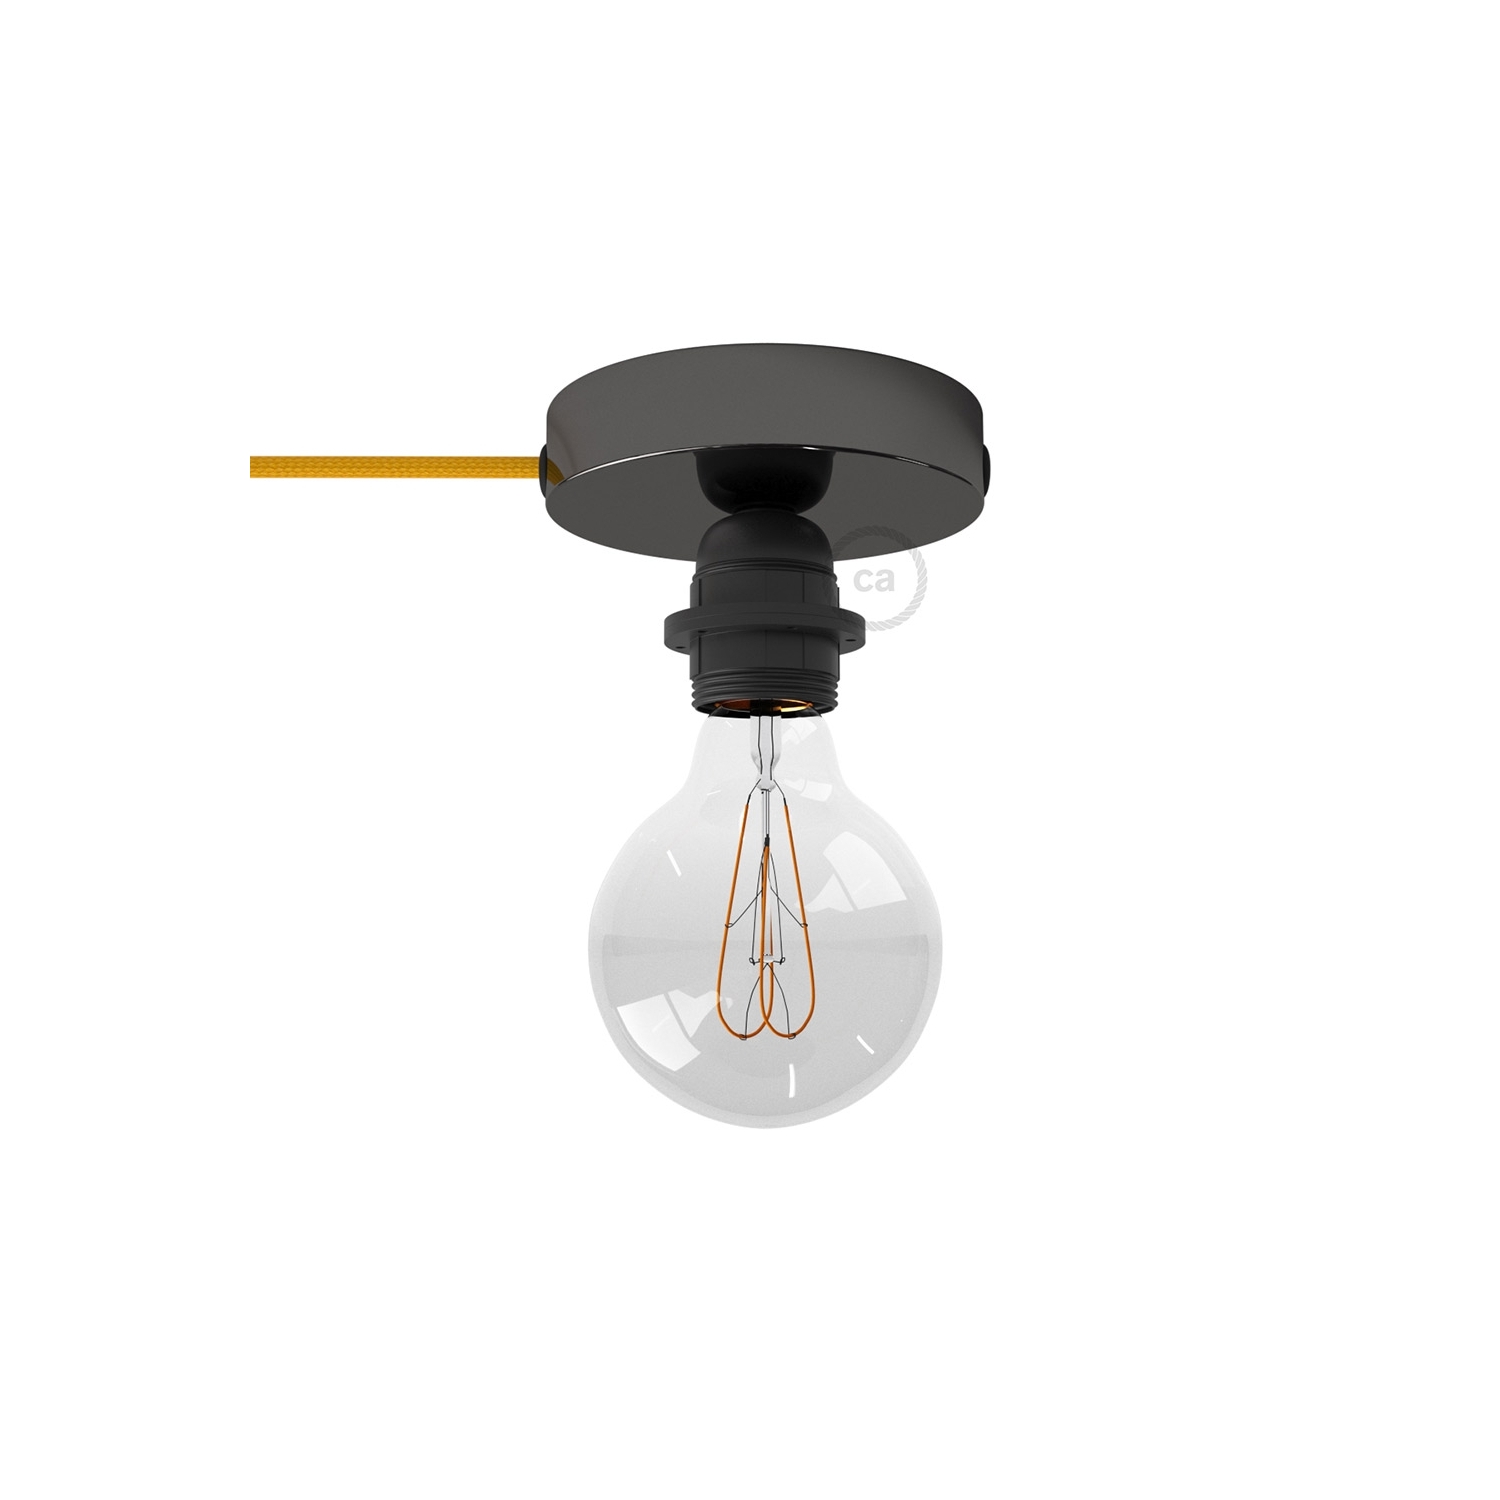 Spostaluce, the black pearl light source with E26 threaded socket, fabric cable and side holes